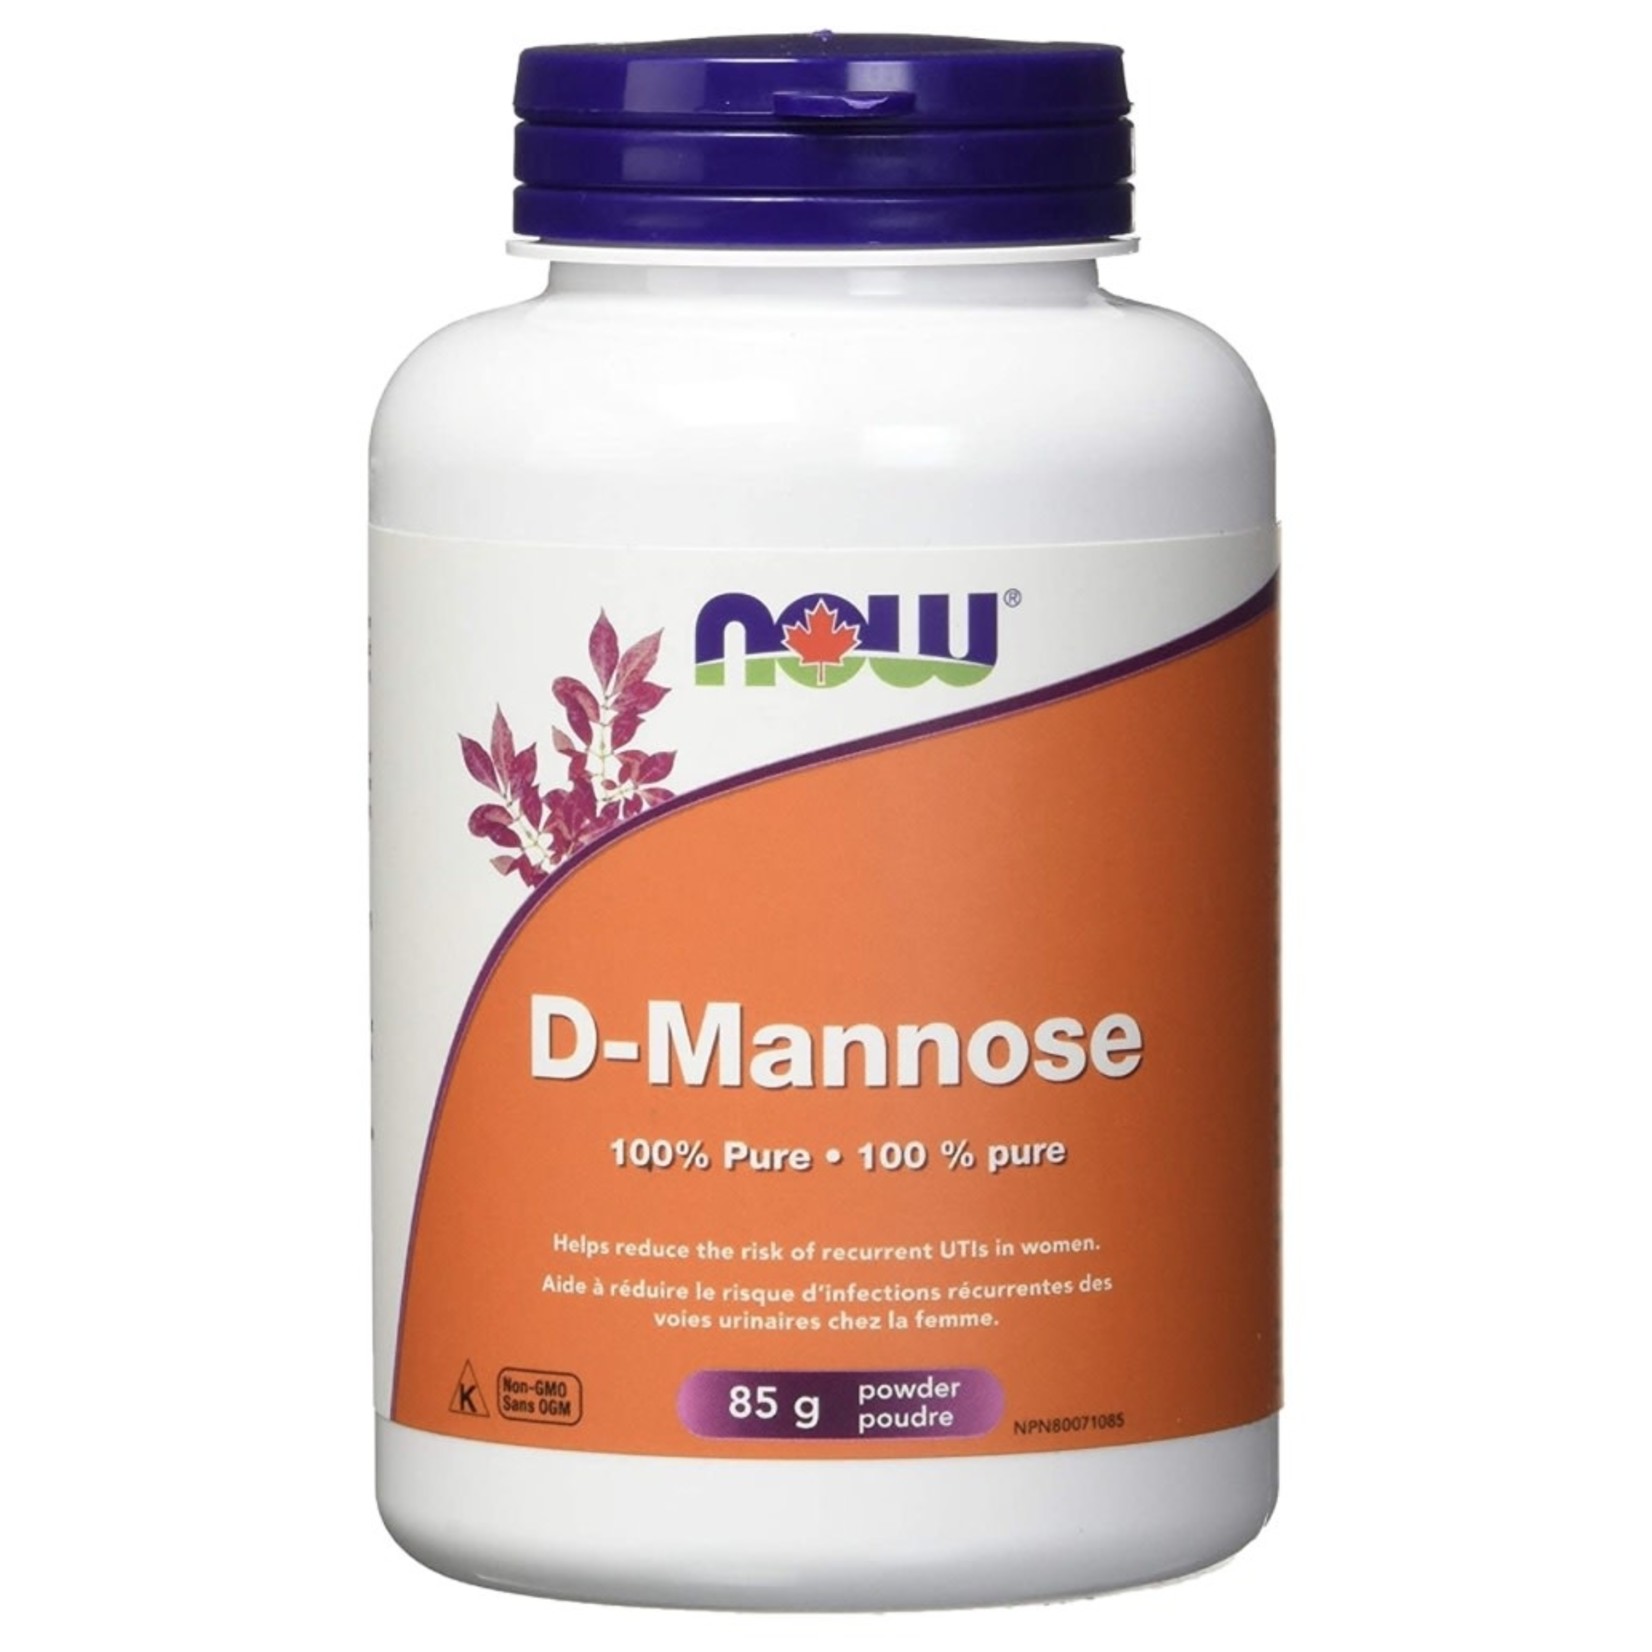 Now Now D-Mannose 85g powder